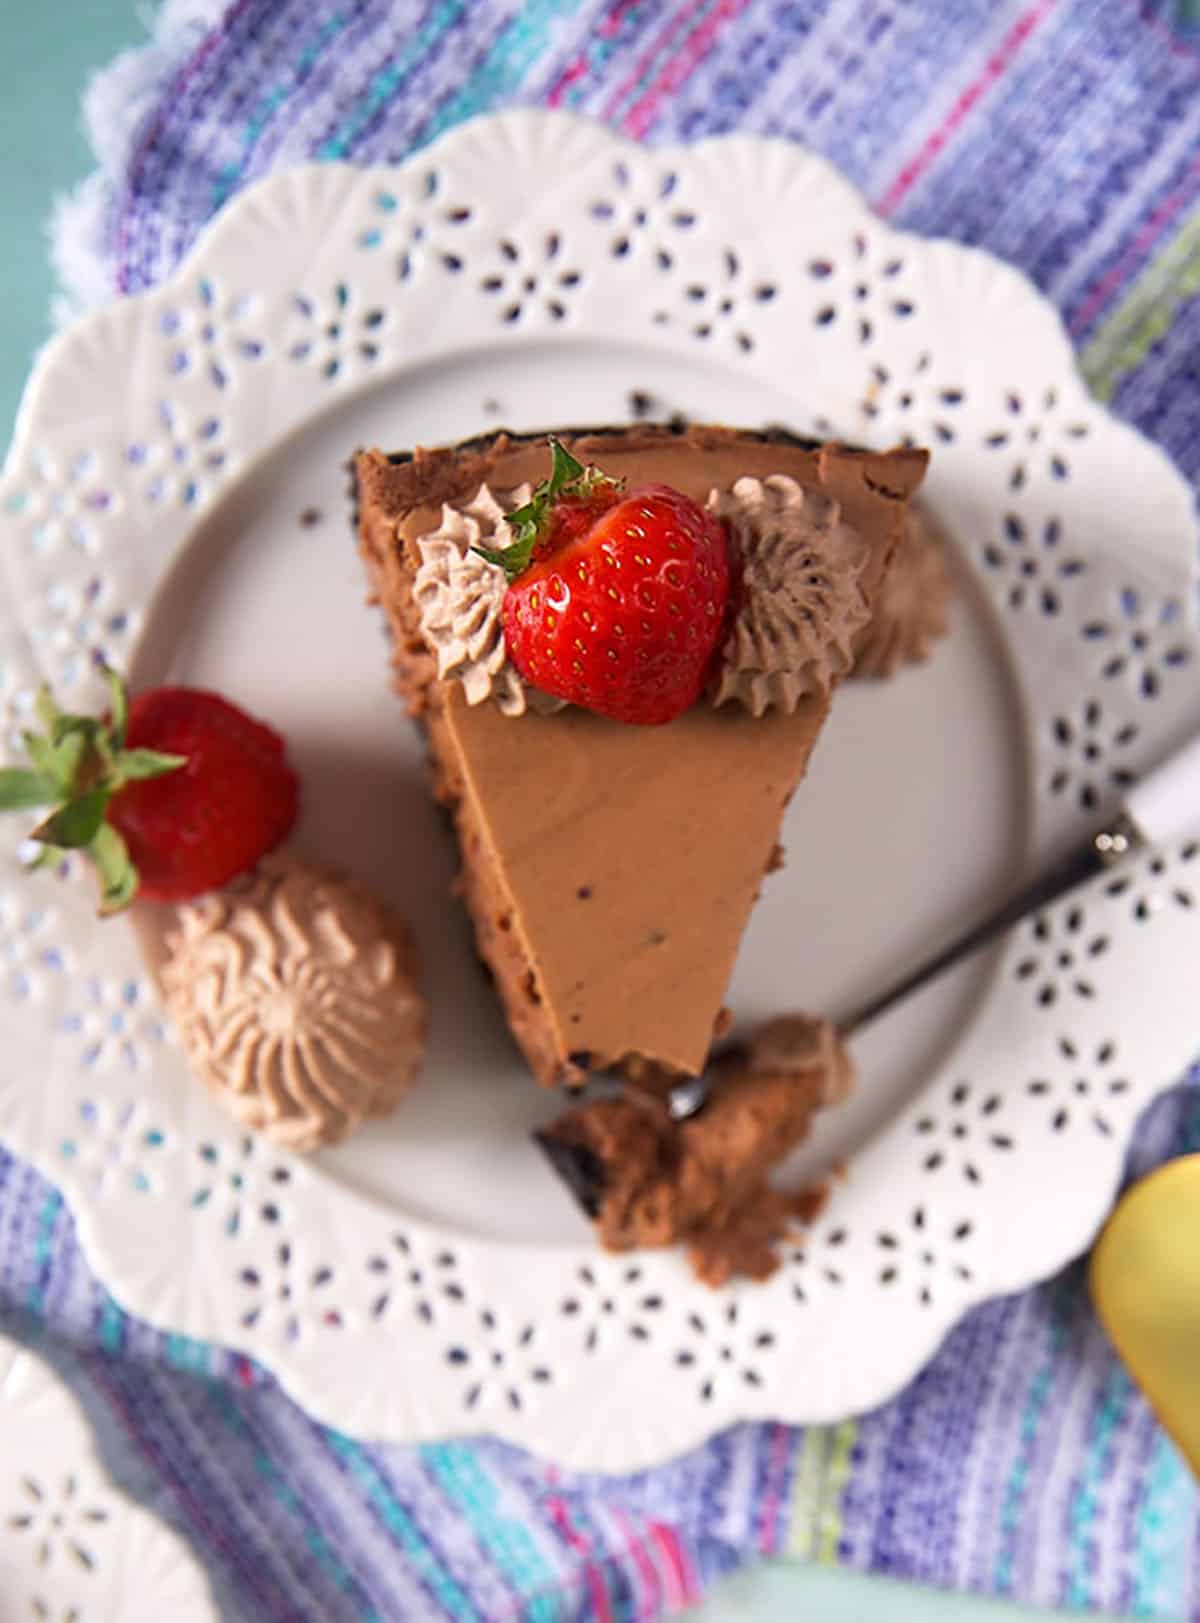 Overhead shot of a slice of chocolate cheesecake with a strawberry on top on a white plate.